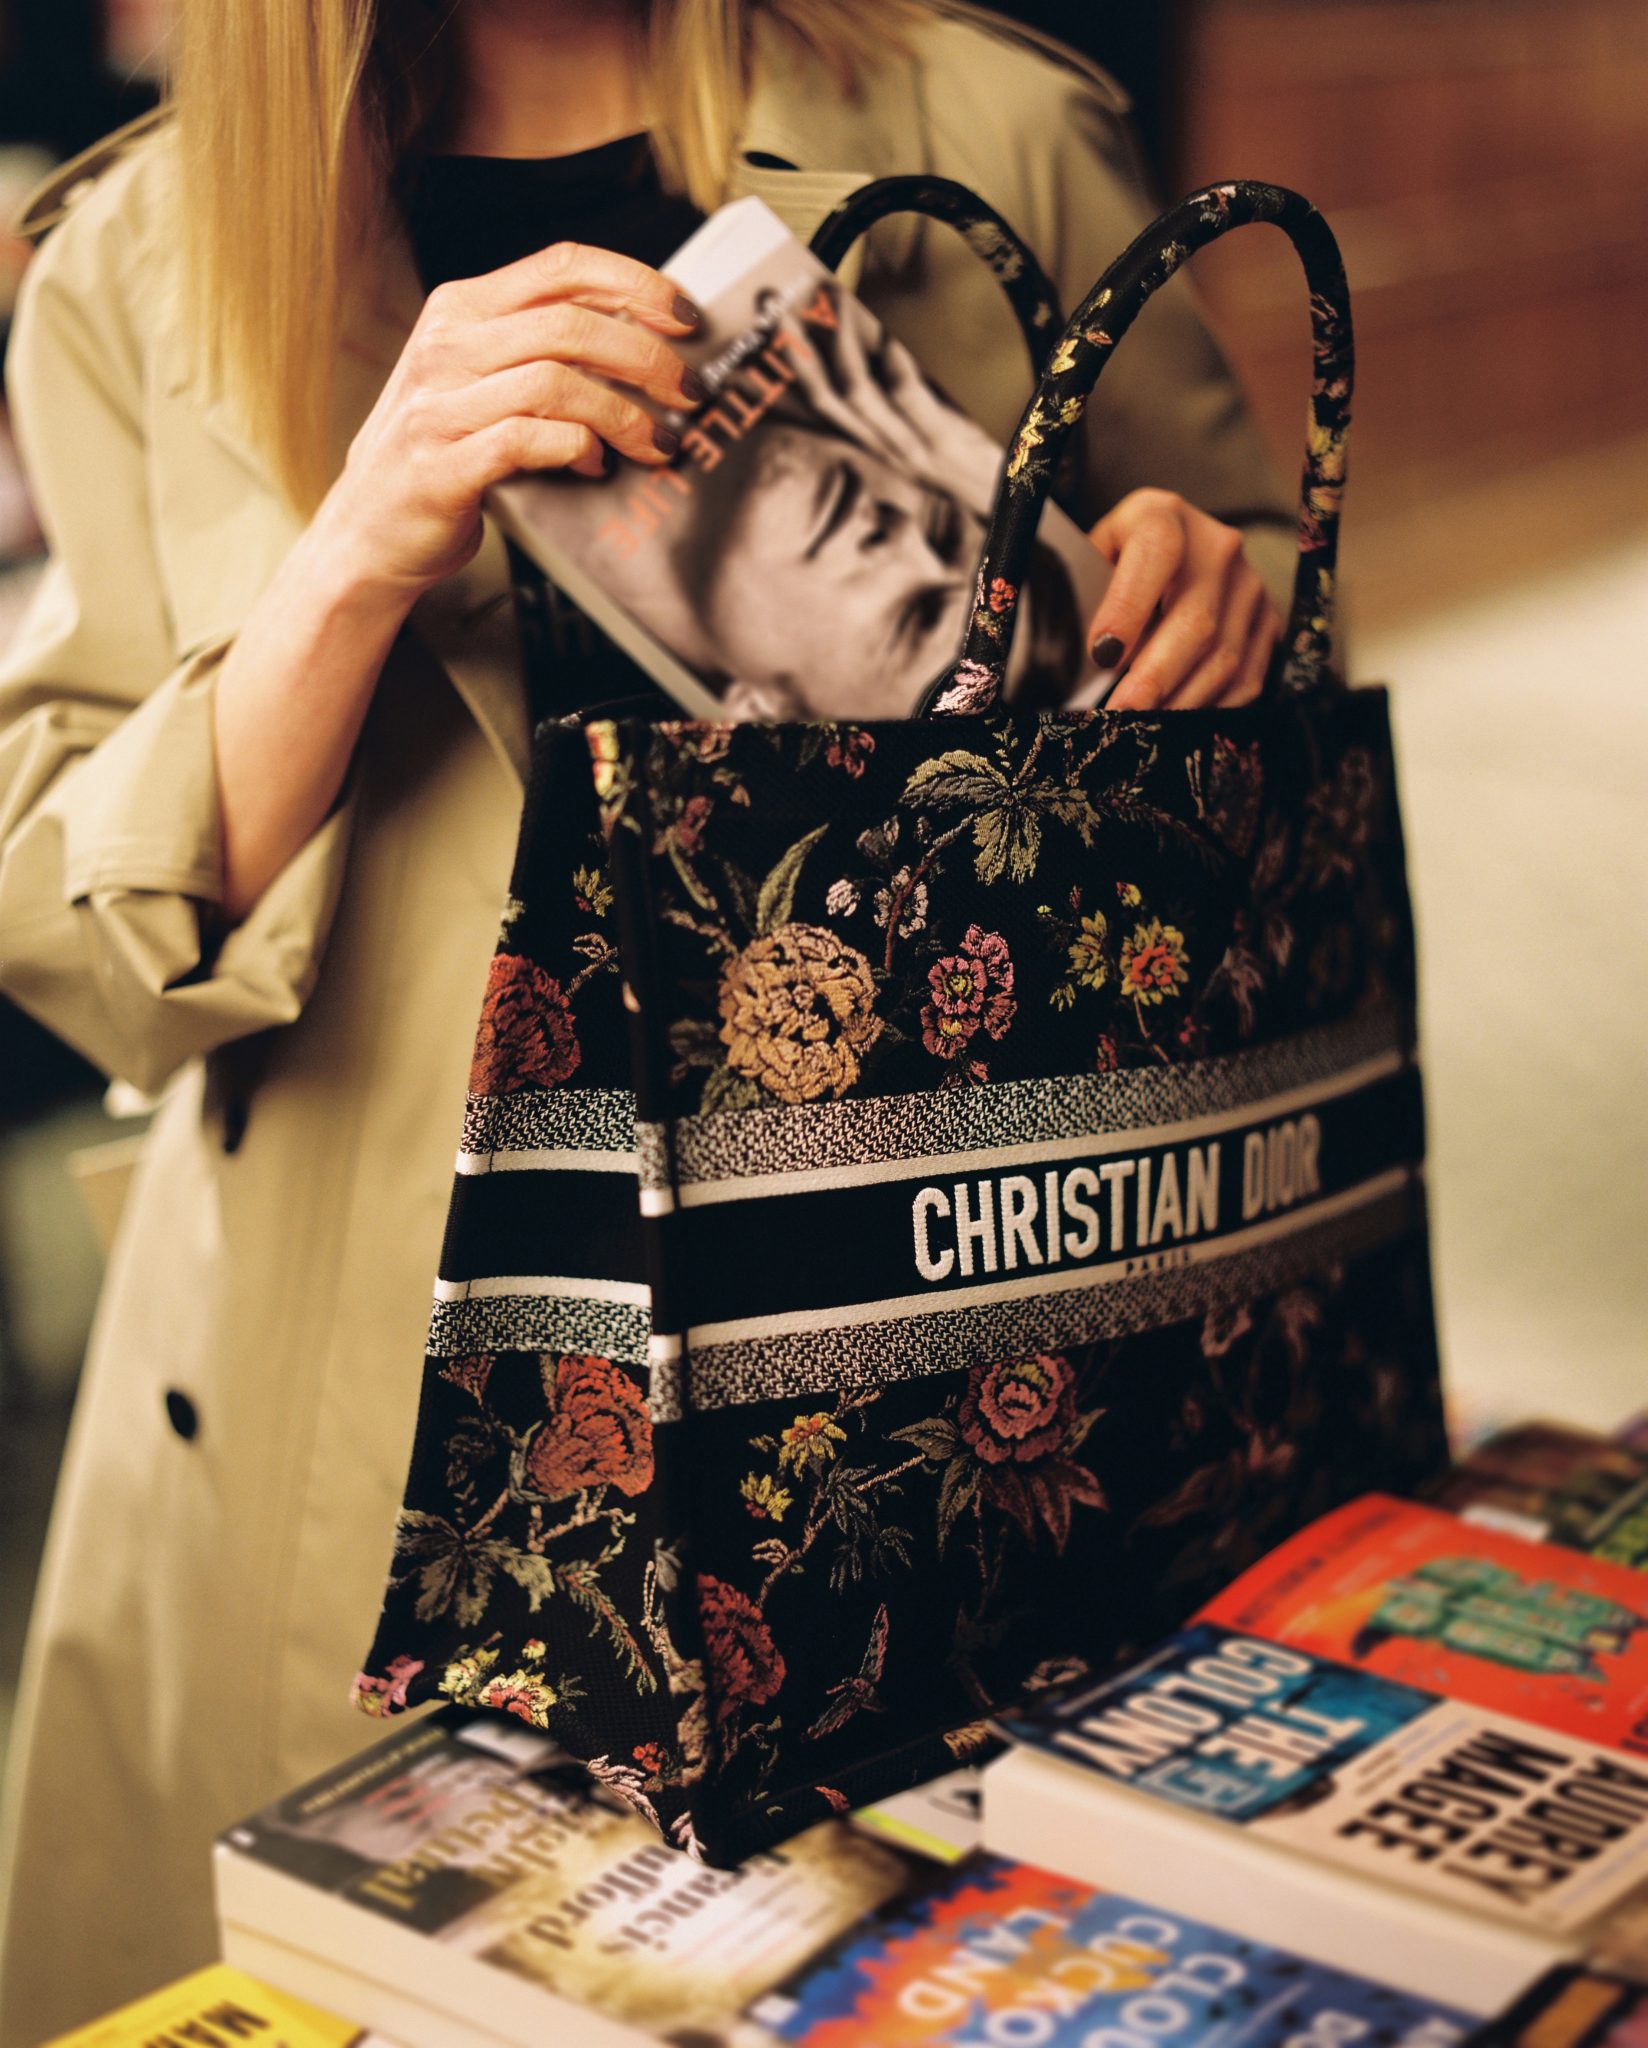 How Much Is The Dior Book Tote?